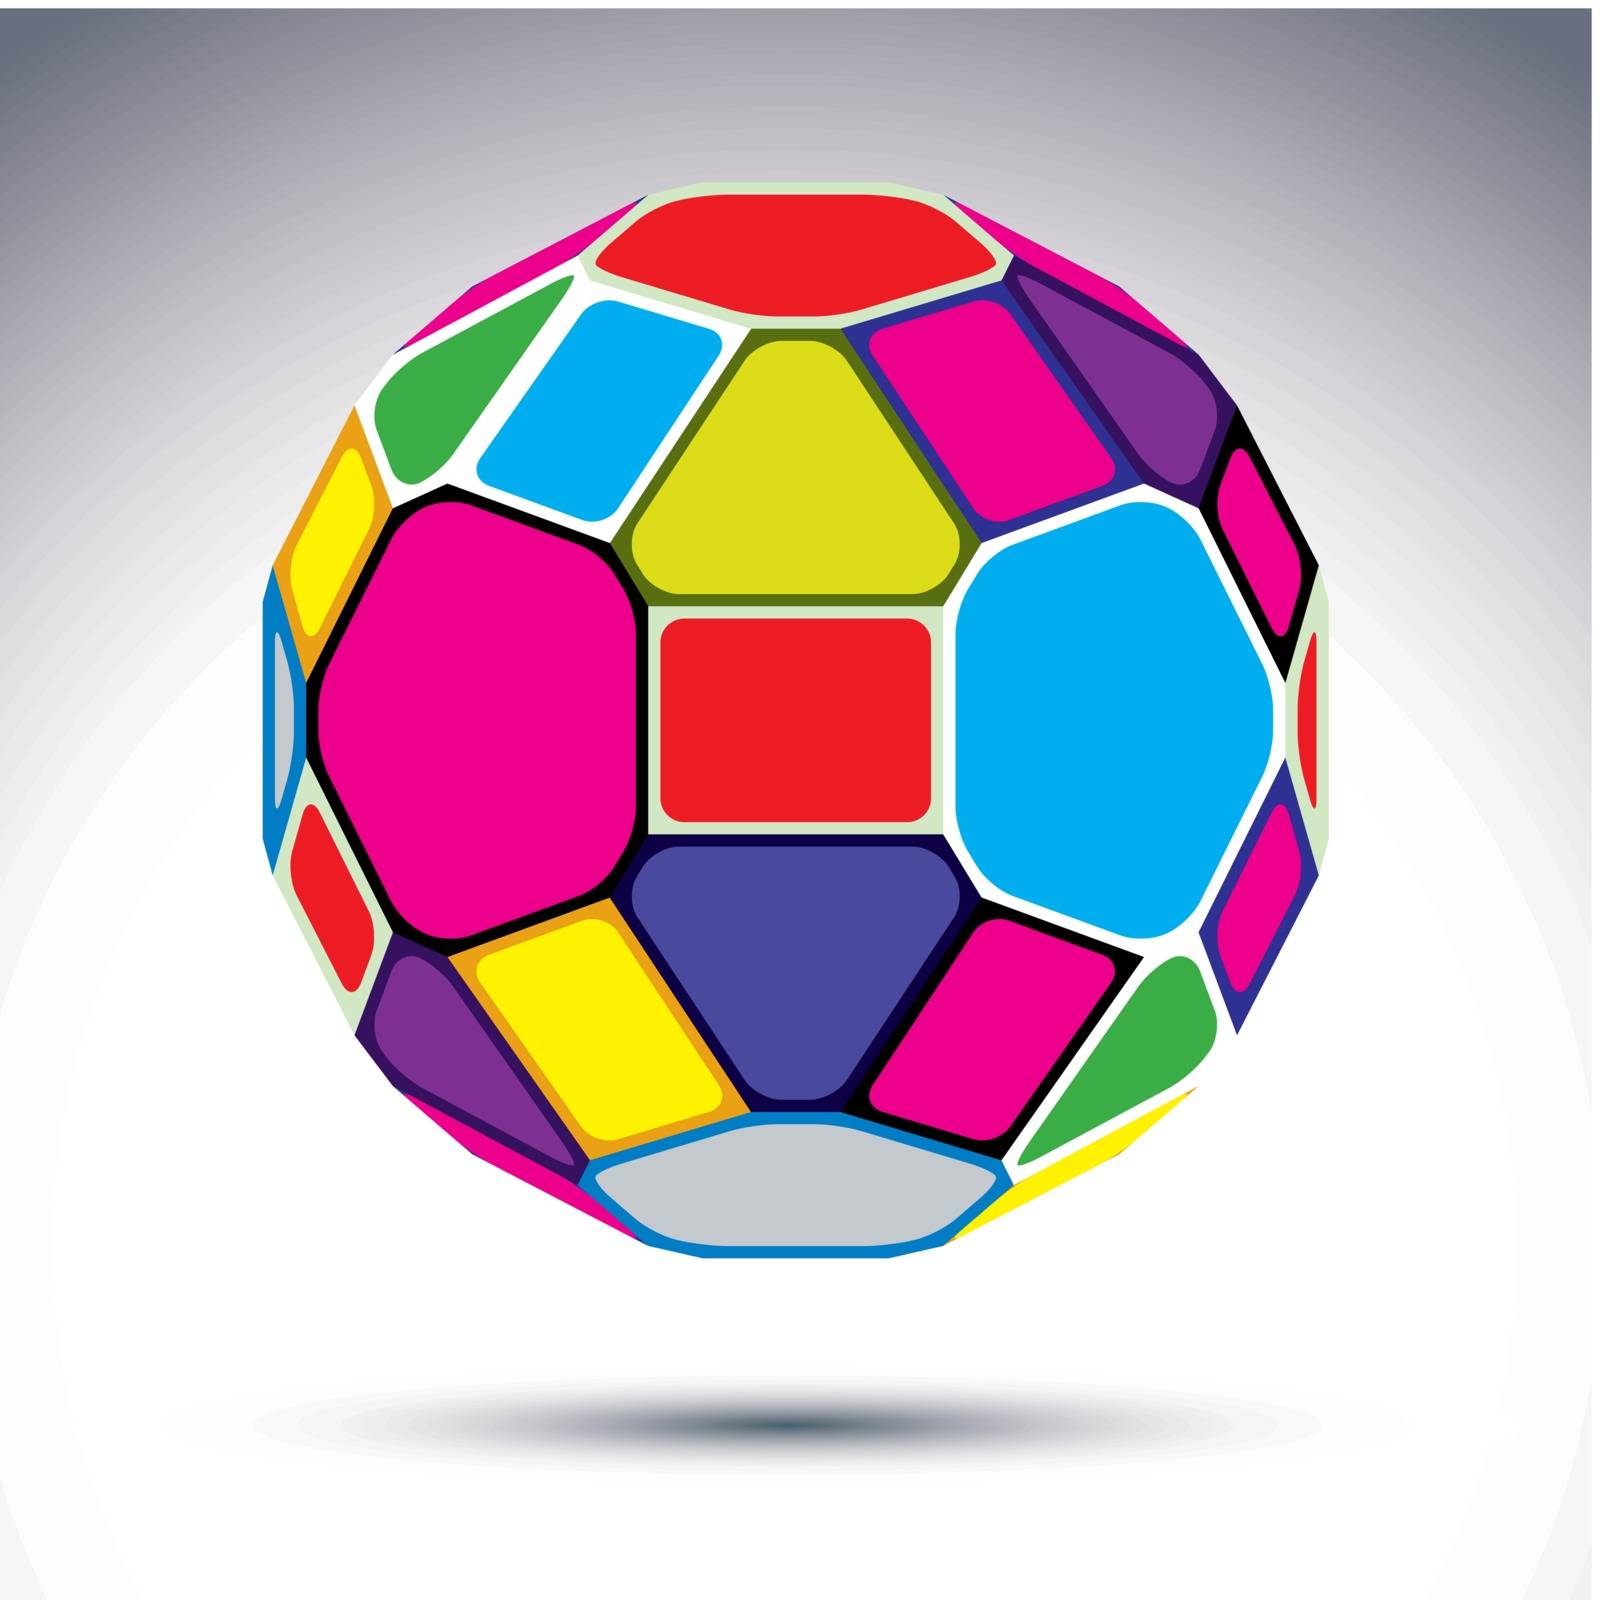 Abstract complicated 3d ball with kaleidoscope effect. Bright sphere constructed from colorful geometric elements ��� rectangles, triangles and pentagons.